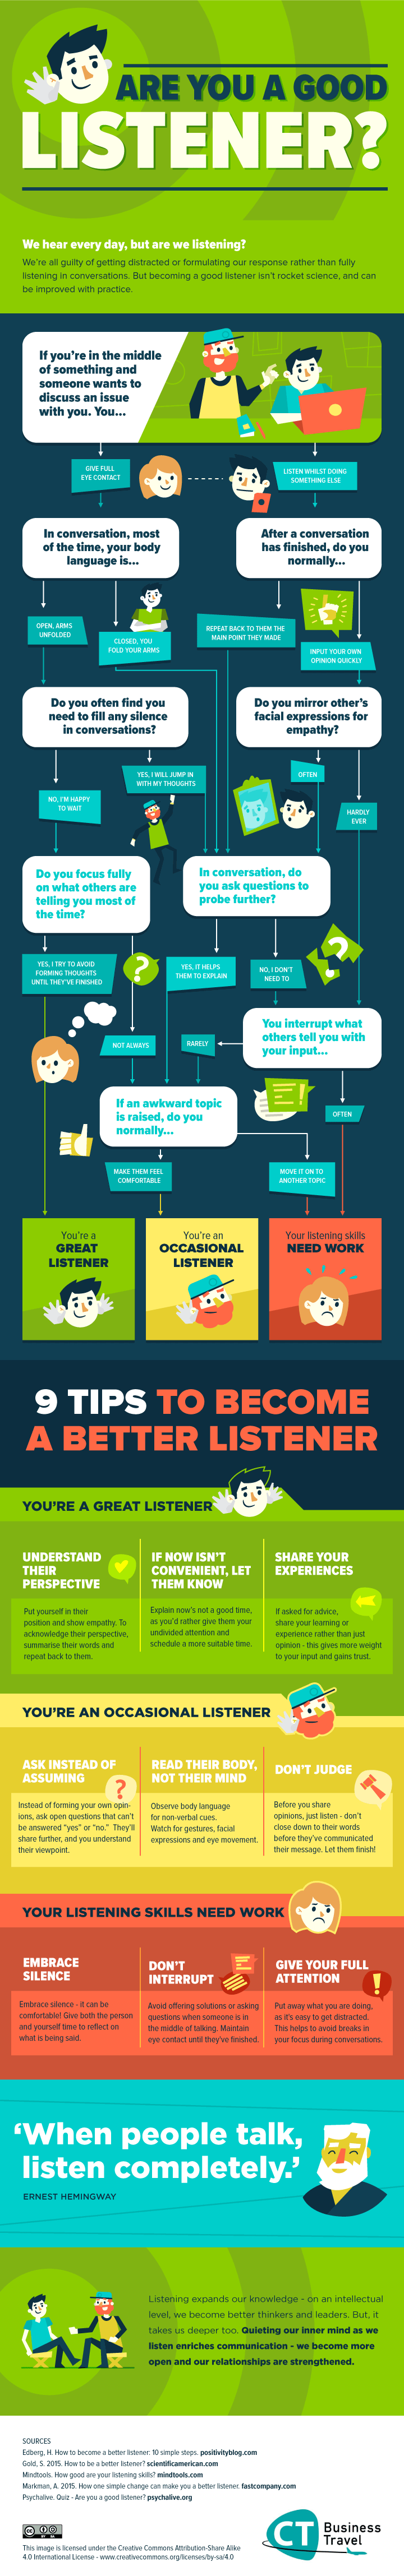 How To Be A Good Listener